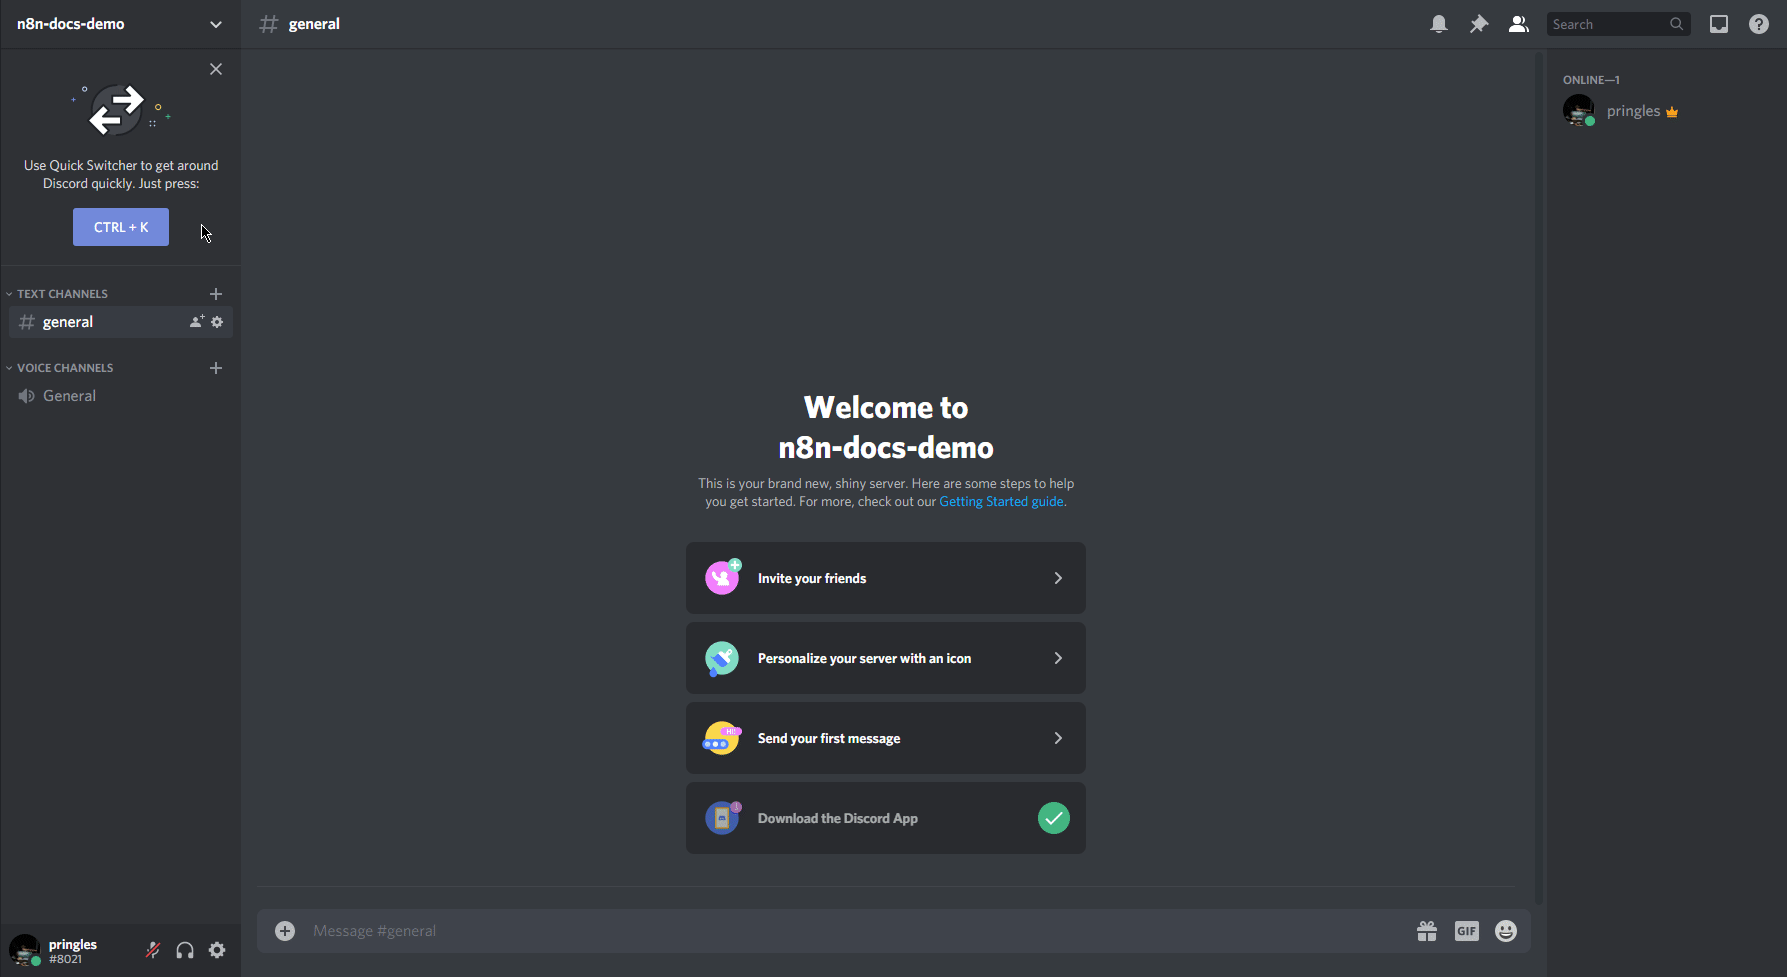 How to create a webhook in Discord